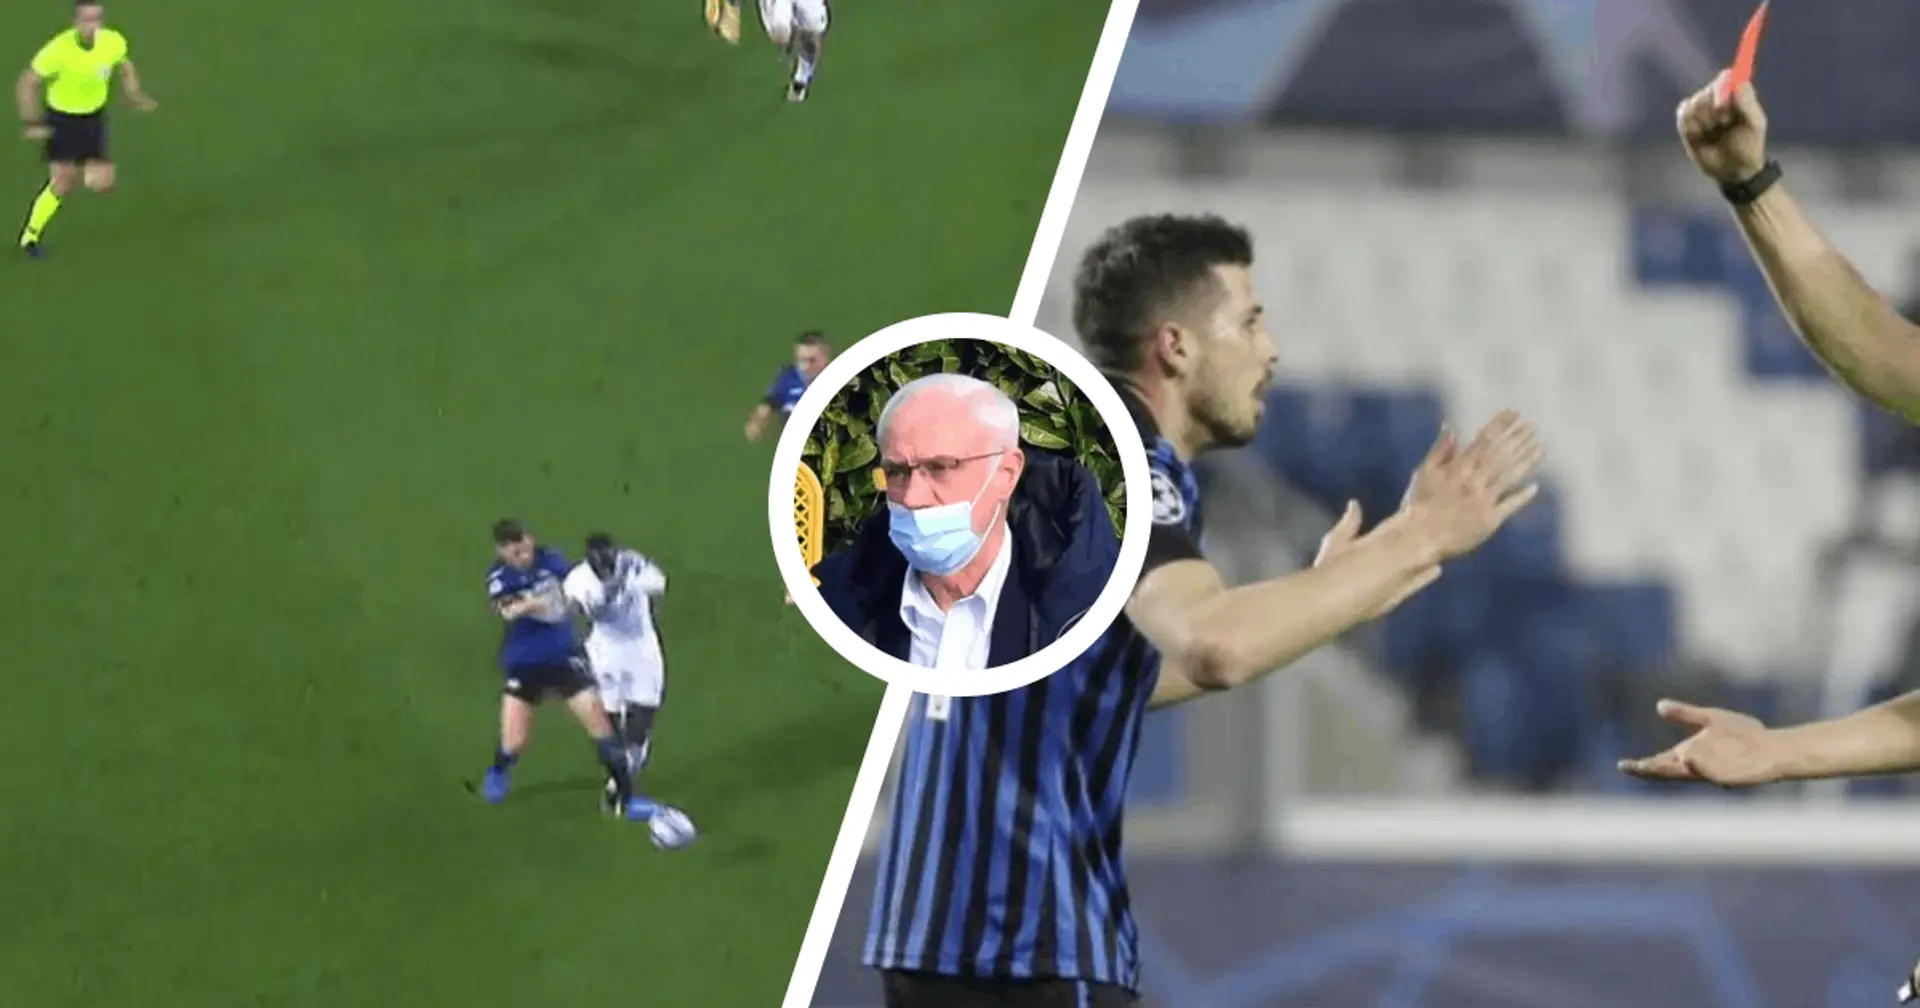 'It was a shock, it was shameful': Atalanta president slams ref for sending Freuler off and lists other 'dubious' decisions vs Real Madrid